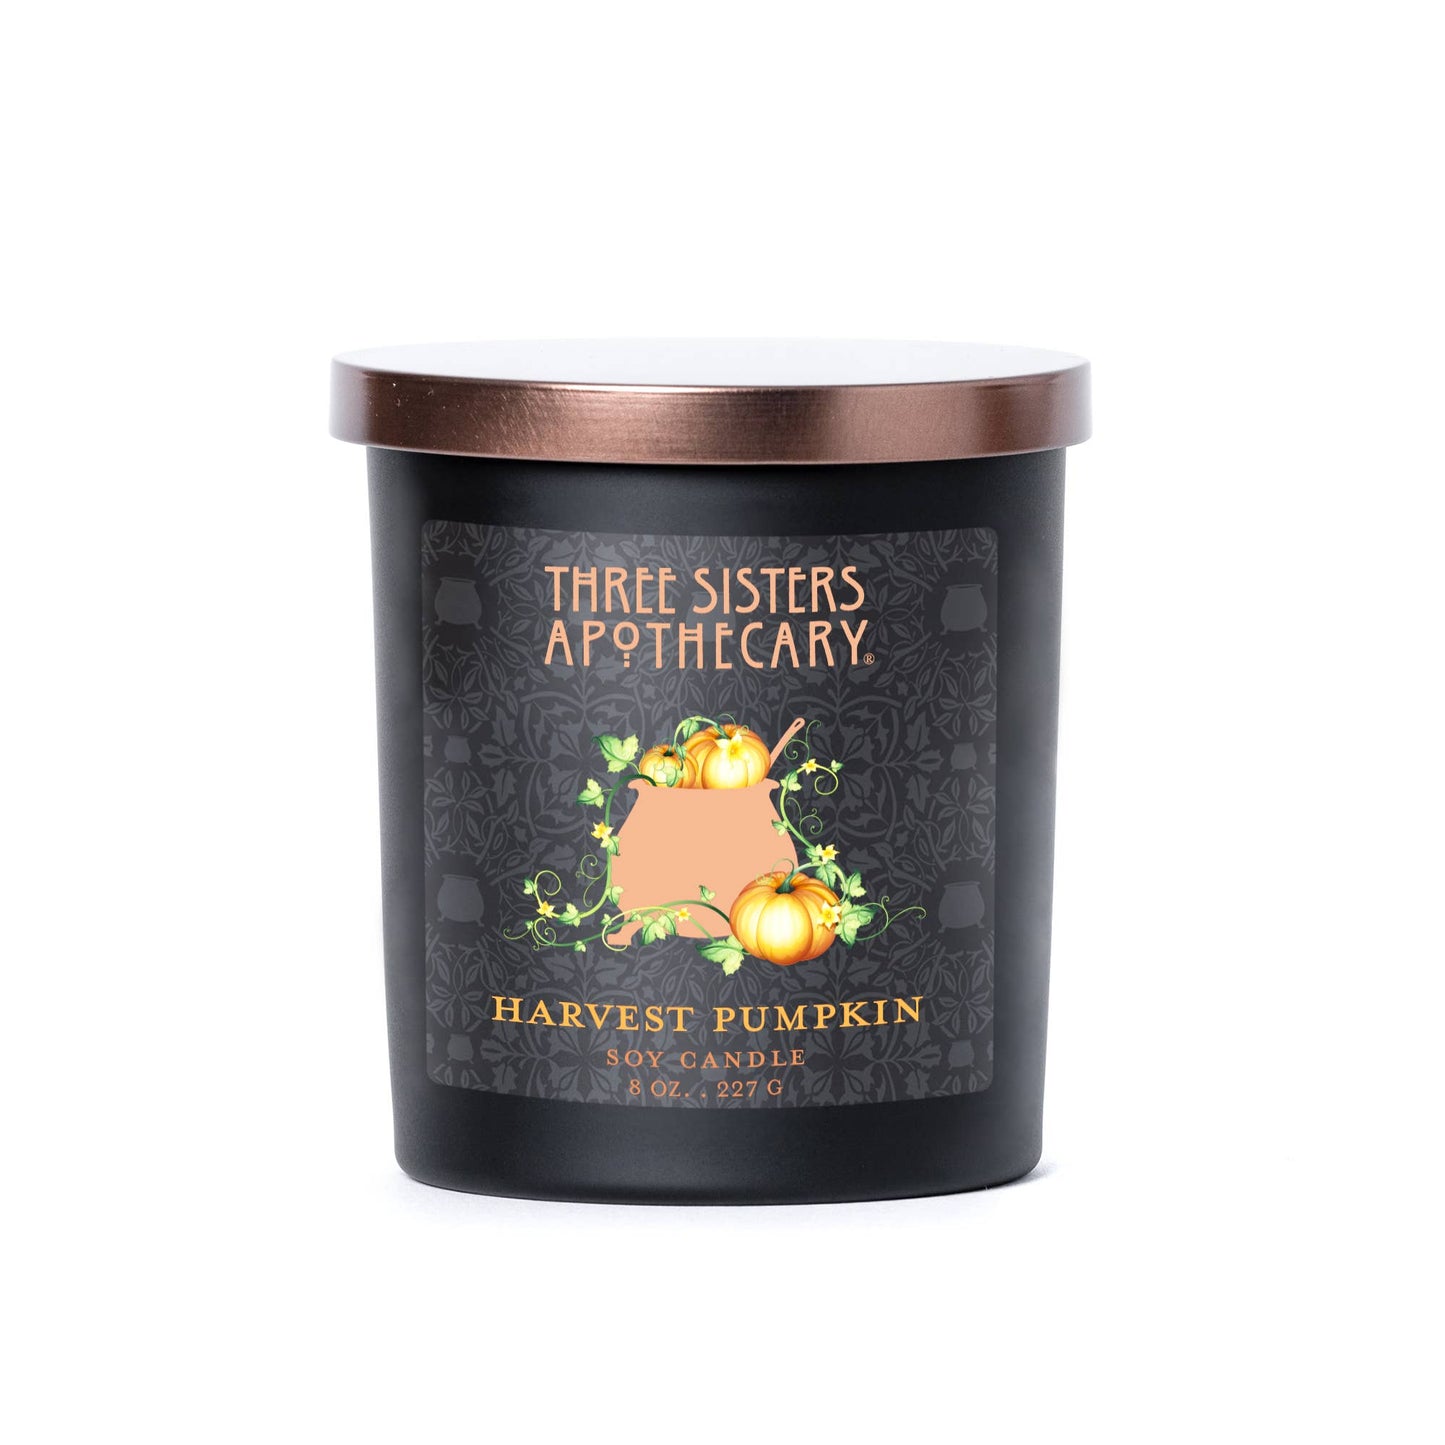 Candle: Harvest Pumpkin by Three Sisters Apothecary